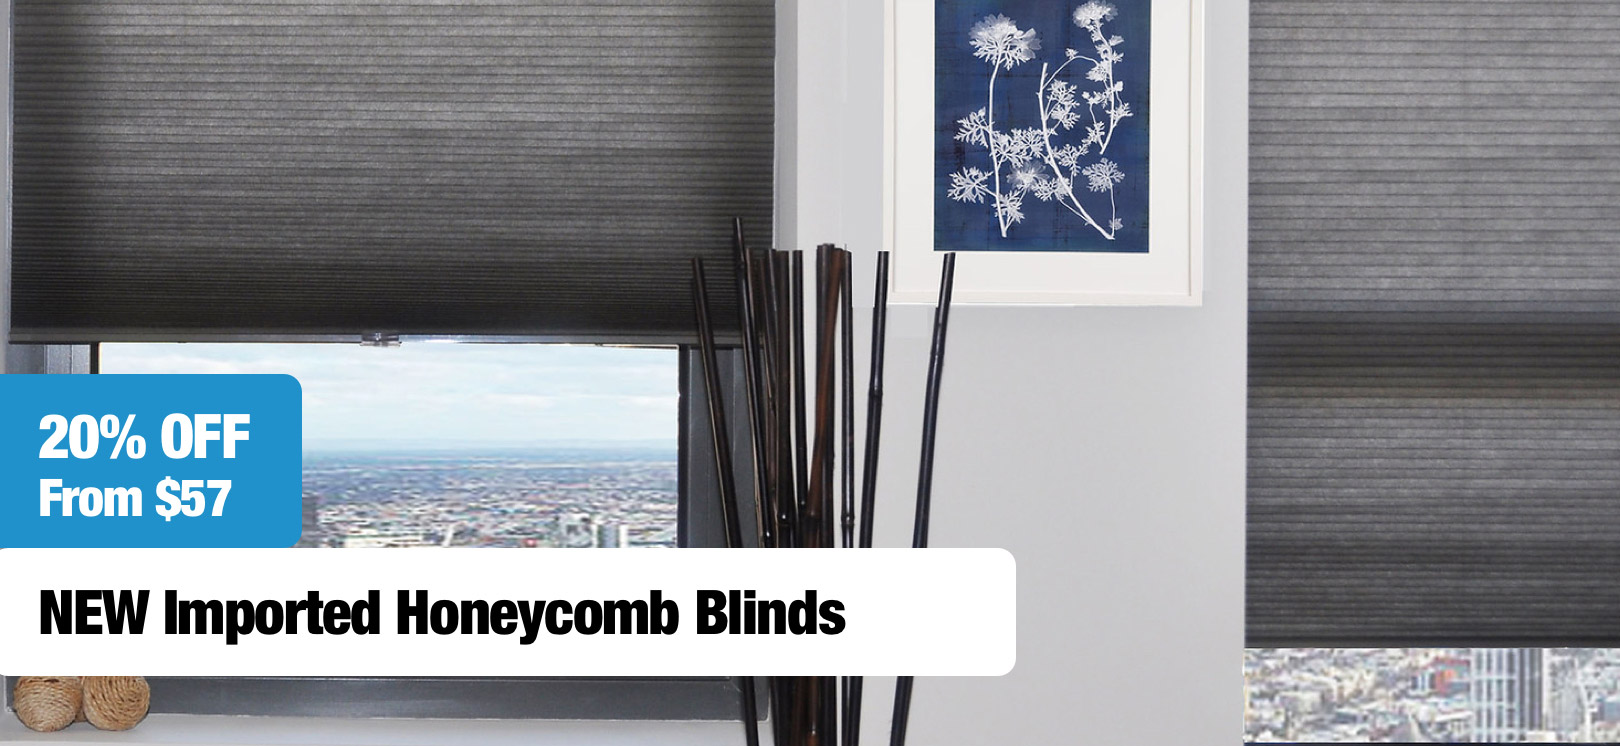 NEW Imported Honeycomb Blinds From $57